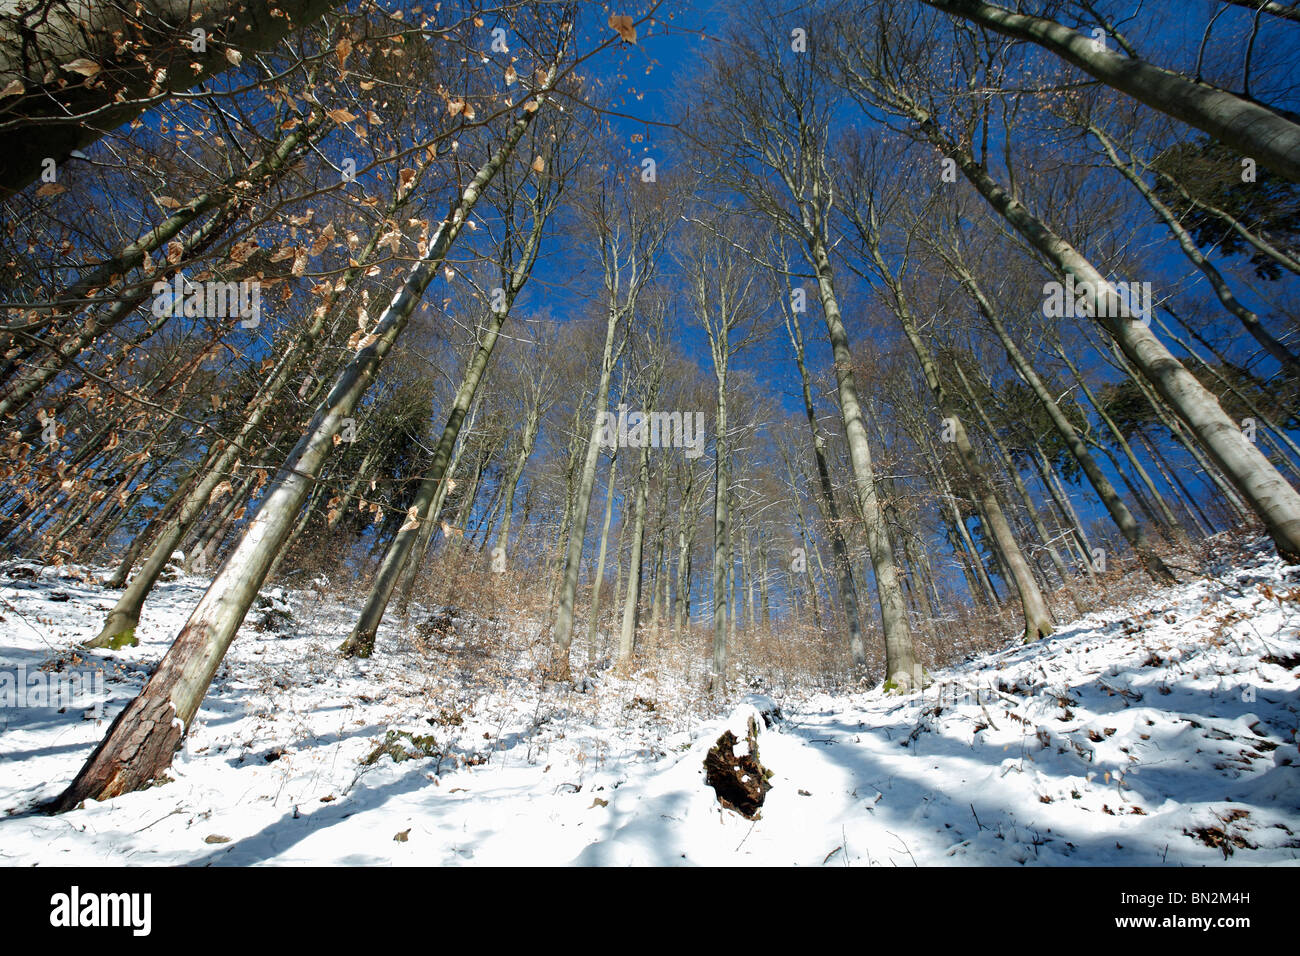 Mixed woodland, mainly beech trees, Fagus sylvatica, after snowfall in winter, Lower Saxony, Germany Stock Photo